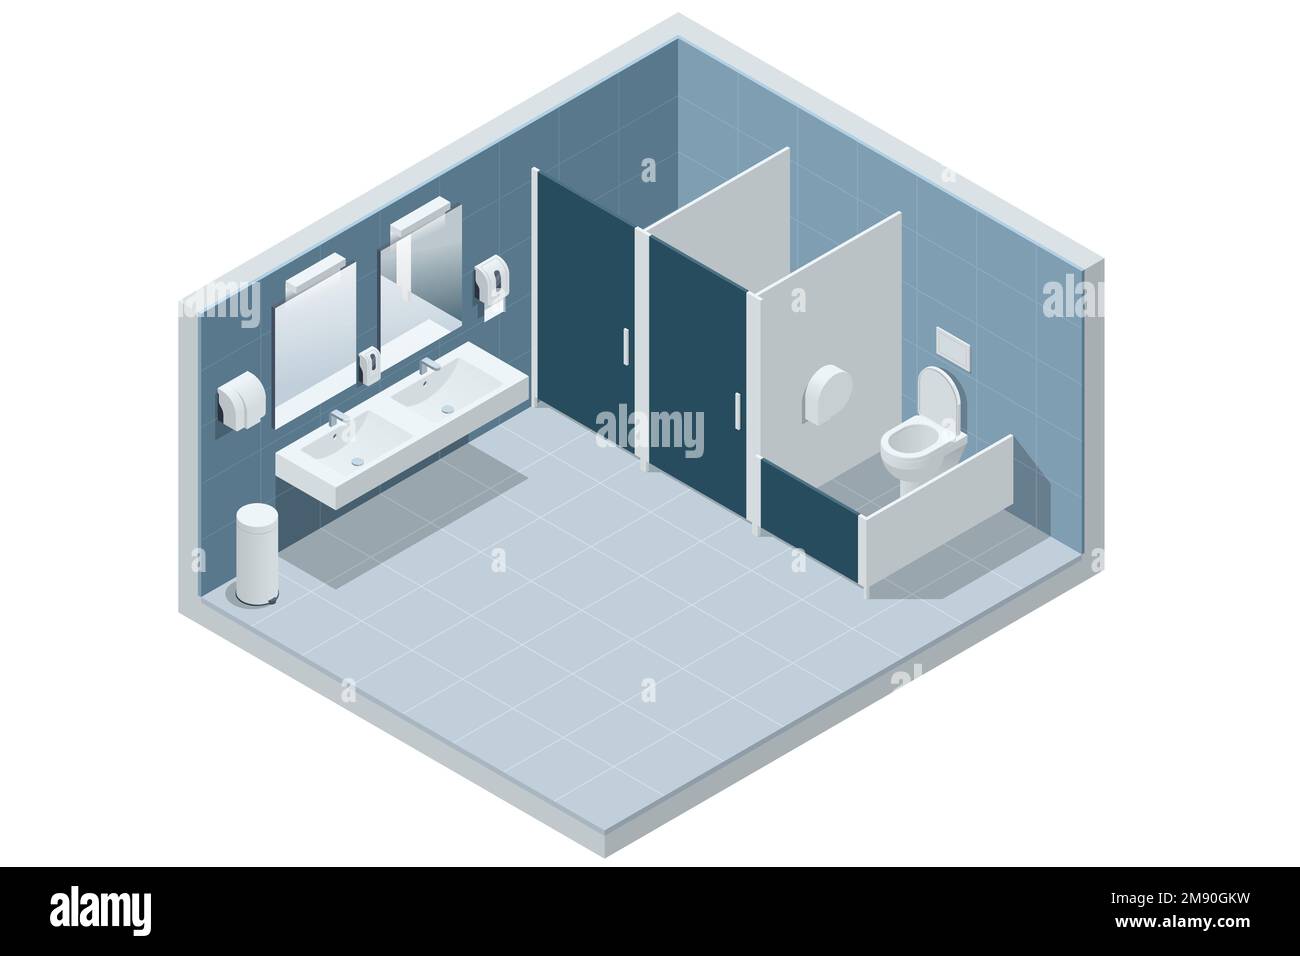 Isometric Clean Public Restroom Interior. Restroom with Cubicles and Sinks. Public toilet, restroom, lavatory water closet, WC. Stock Vector